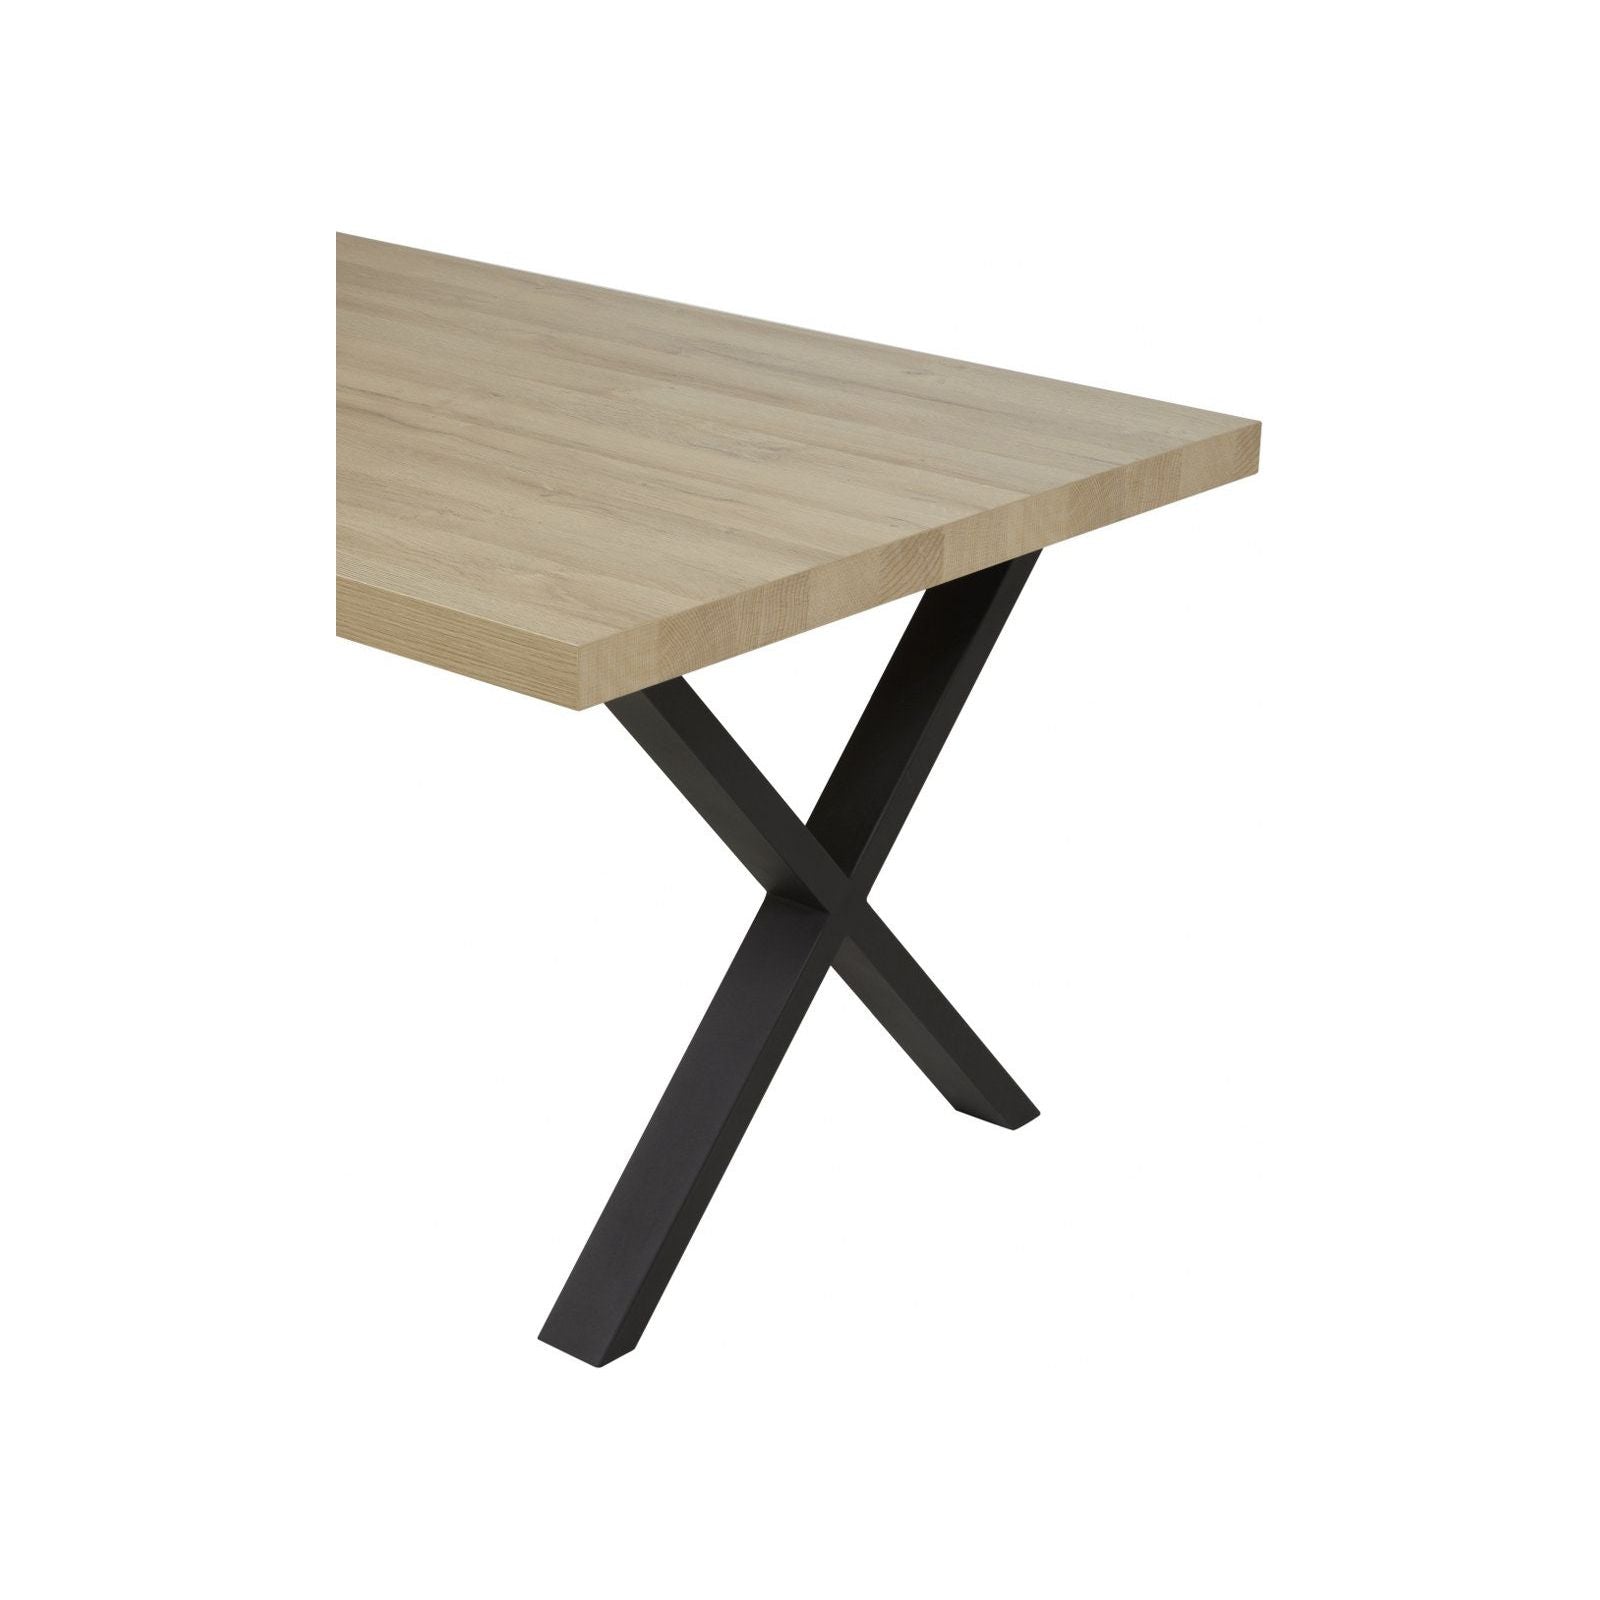 Table | Furniture series Talenso | natural, gray, brown